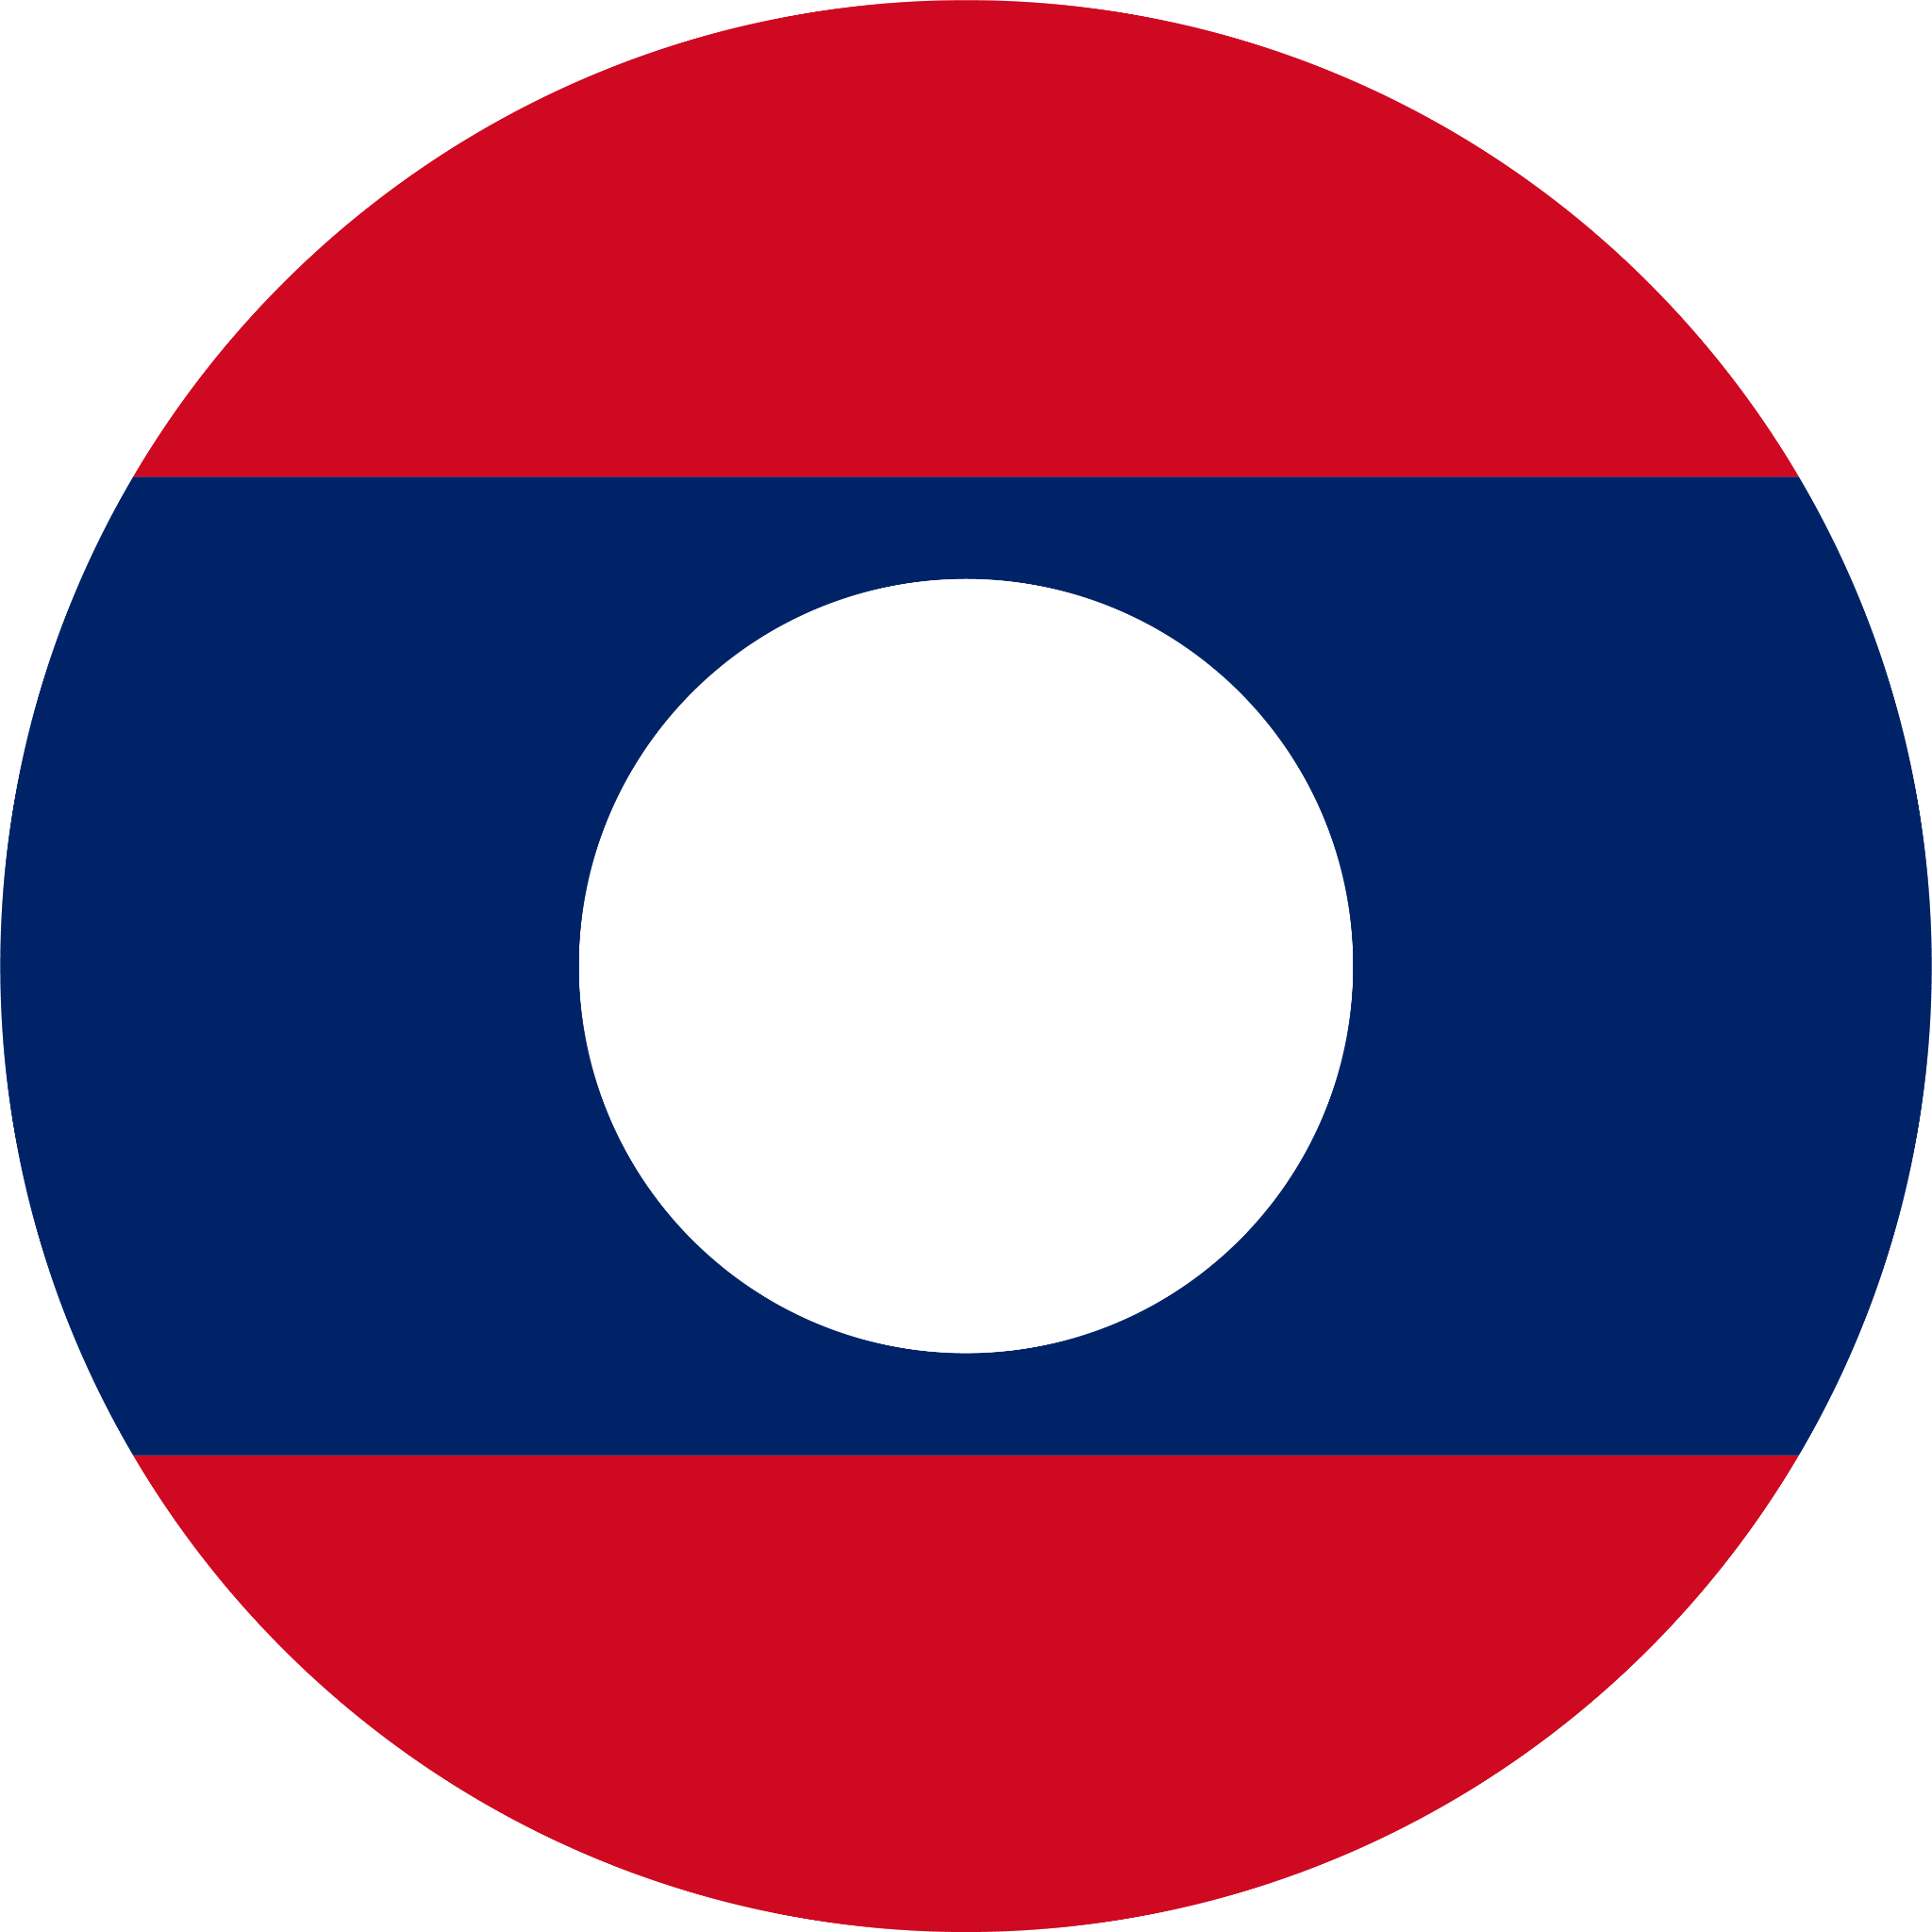 The emblem or symbol representing The Lao People's Liberation Air Force, the aerial warfare branch of the military in Laos